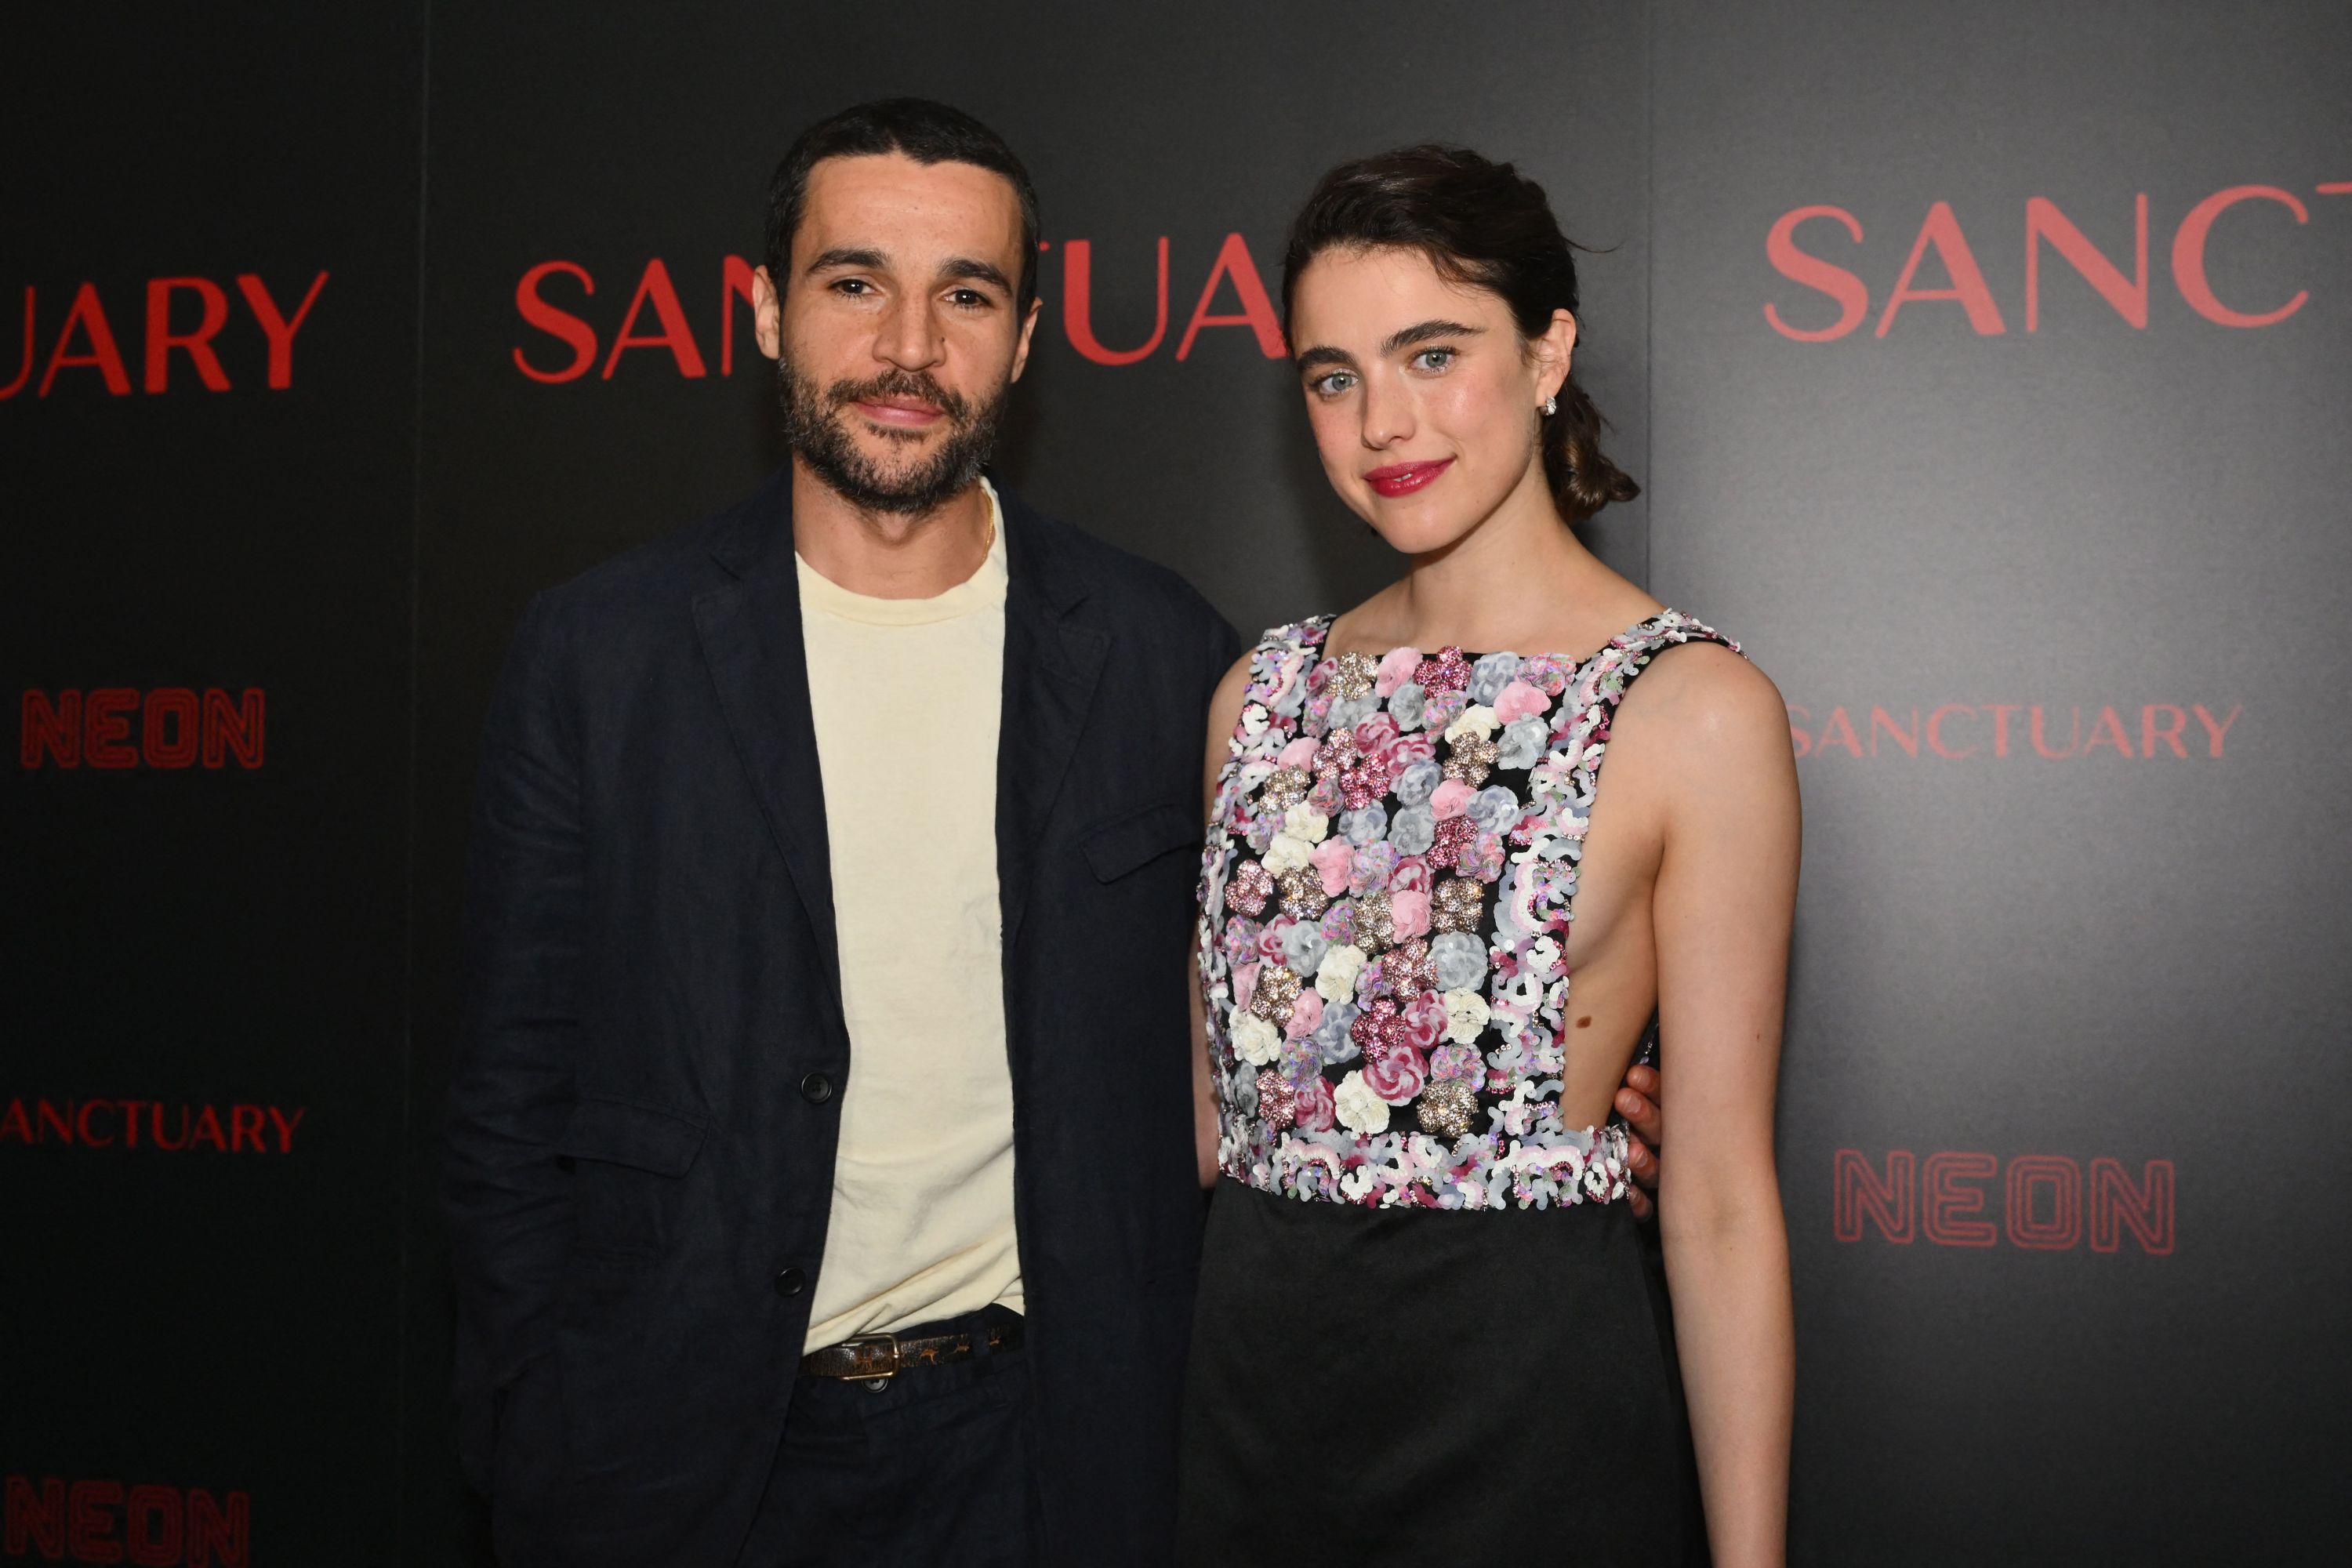 Christopher Abbott and Margaret Qualley at the "Sanctuary" premiere